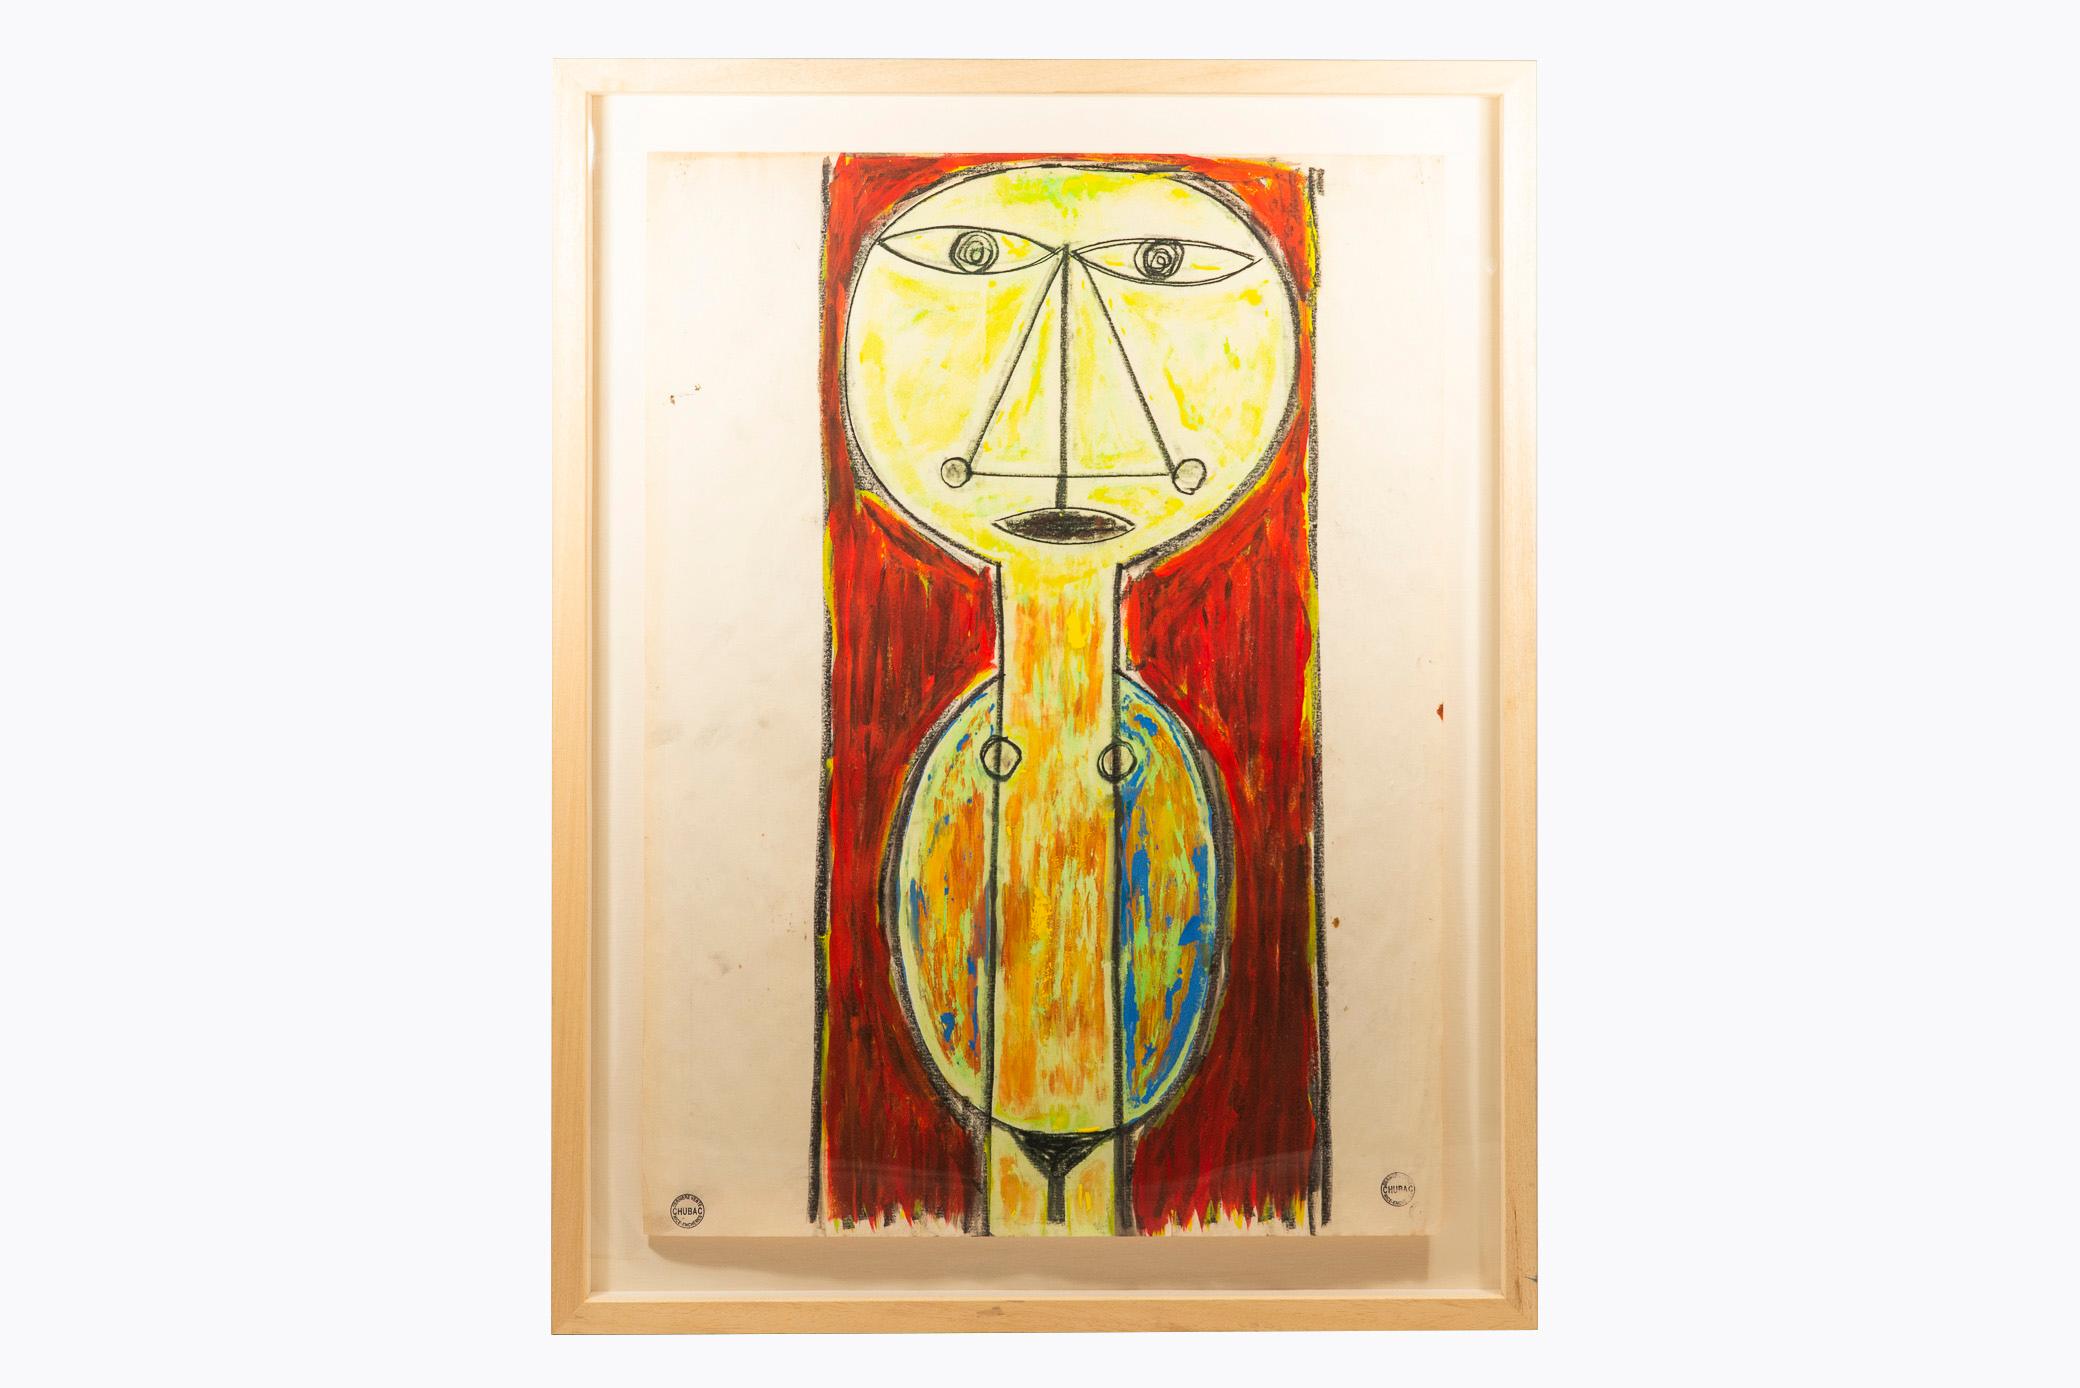 Albert Chubac,
Painting, 
Mixed-Media on Paper, 
Signed, 
circa 1965, France.  

Measures: Height 73 cm, Width 56 cm, Depth 3 cm.